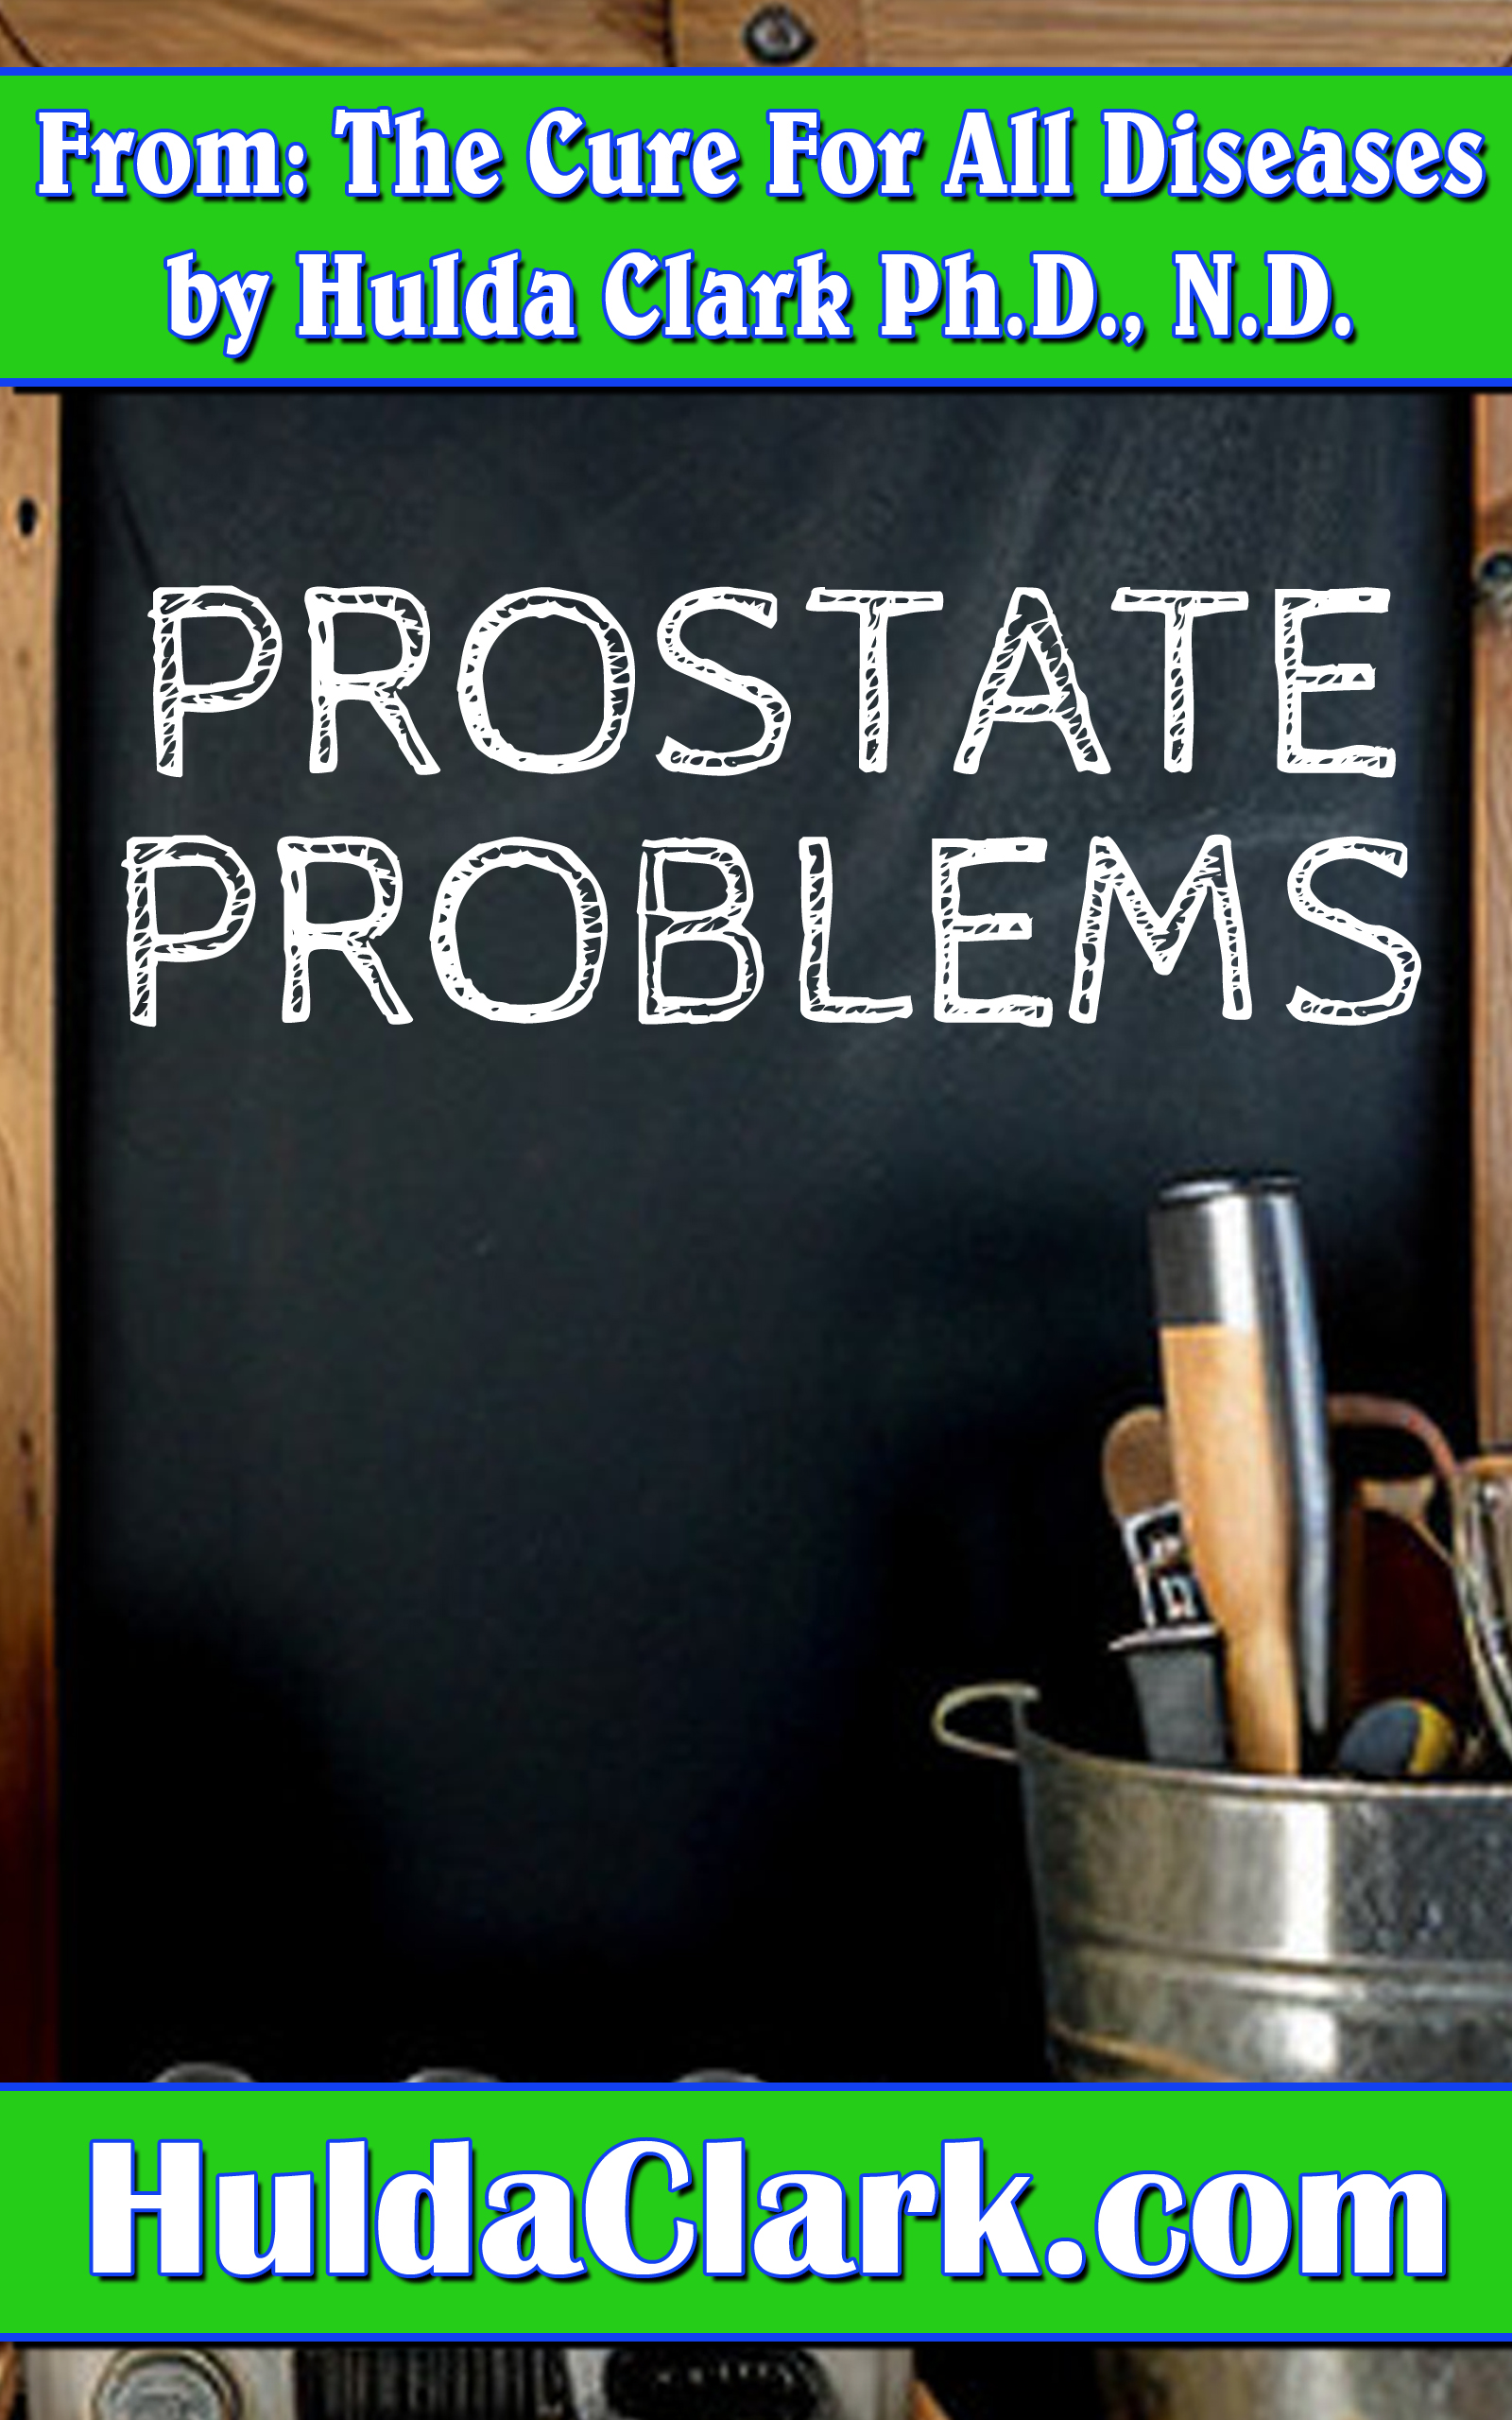 Prostate Problems Ebook excerpt from The Cure for All Diseases by Hulda Clark